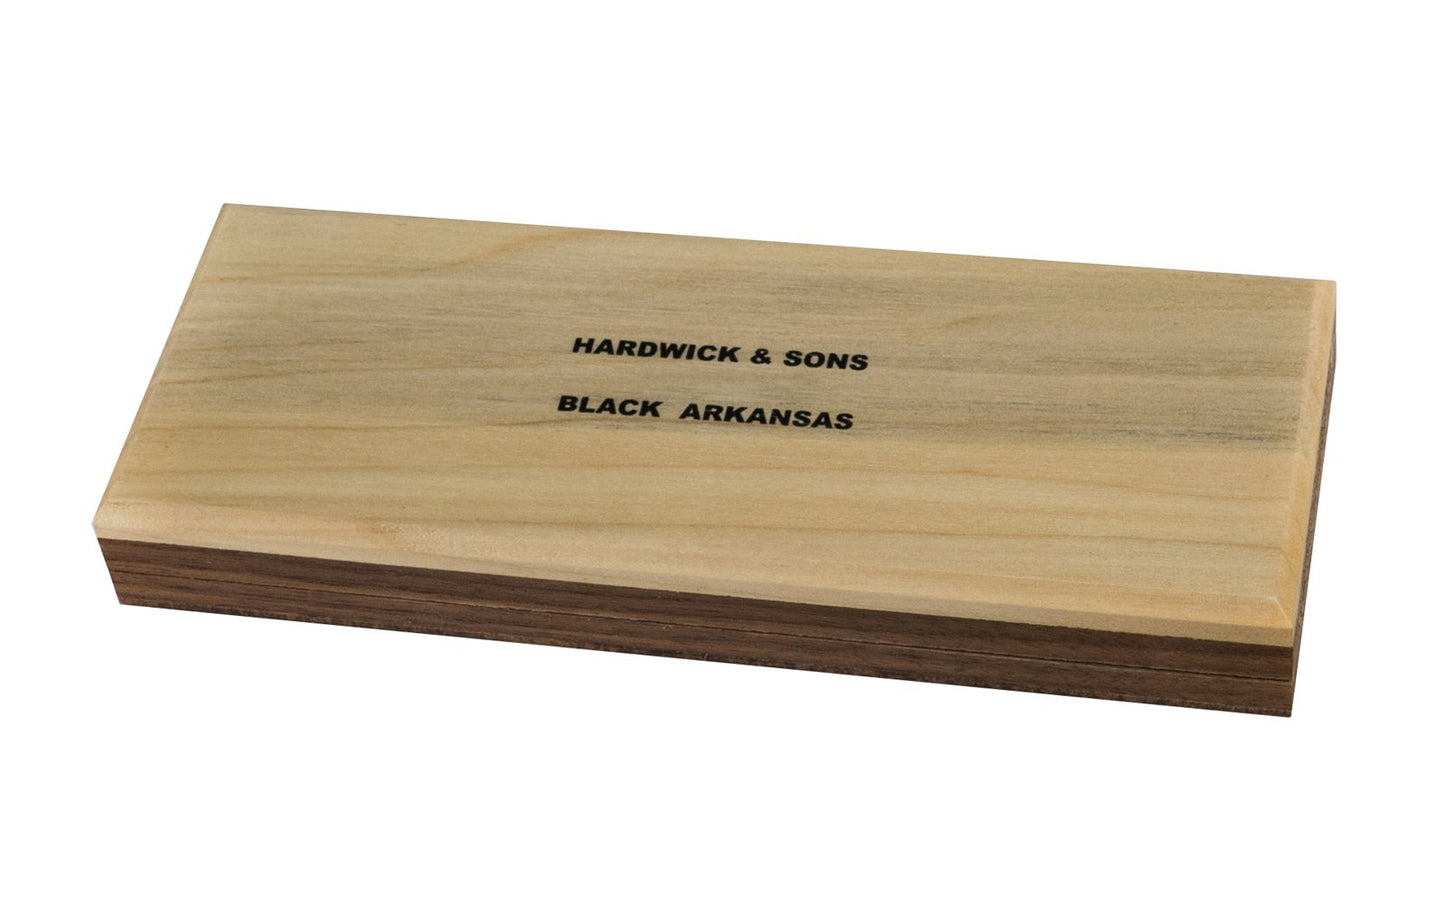 Wide Black Hard Arkansas Bench Stone with Wooden Box ~ 8" x 2-1/2" - Extra Wide ~ Super-fine stone, it is sometimes referred to as the "Surgical Black Arkansas Stone". It is great for putting an ultimate edge on your tools & knives. Many people use the Black Hard Arkansas Stone for the final finish on blades - Model No. BAB-822-C